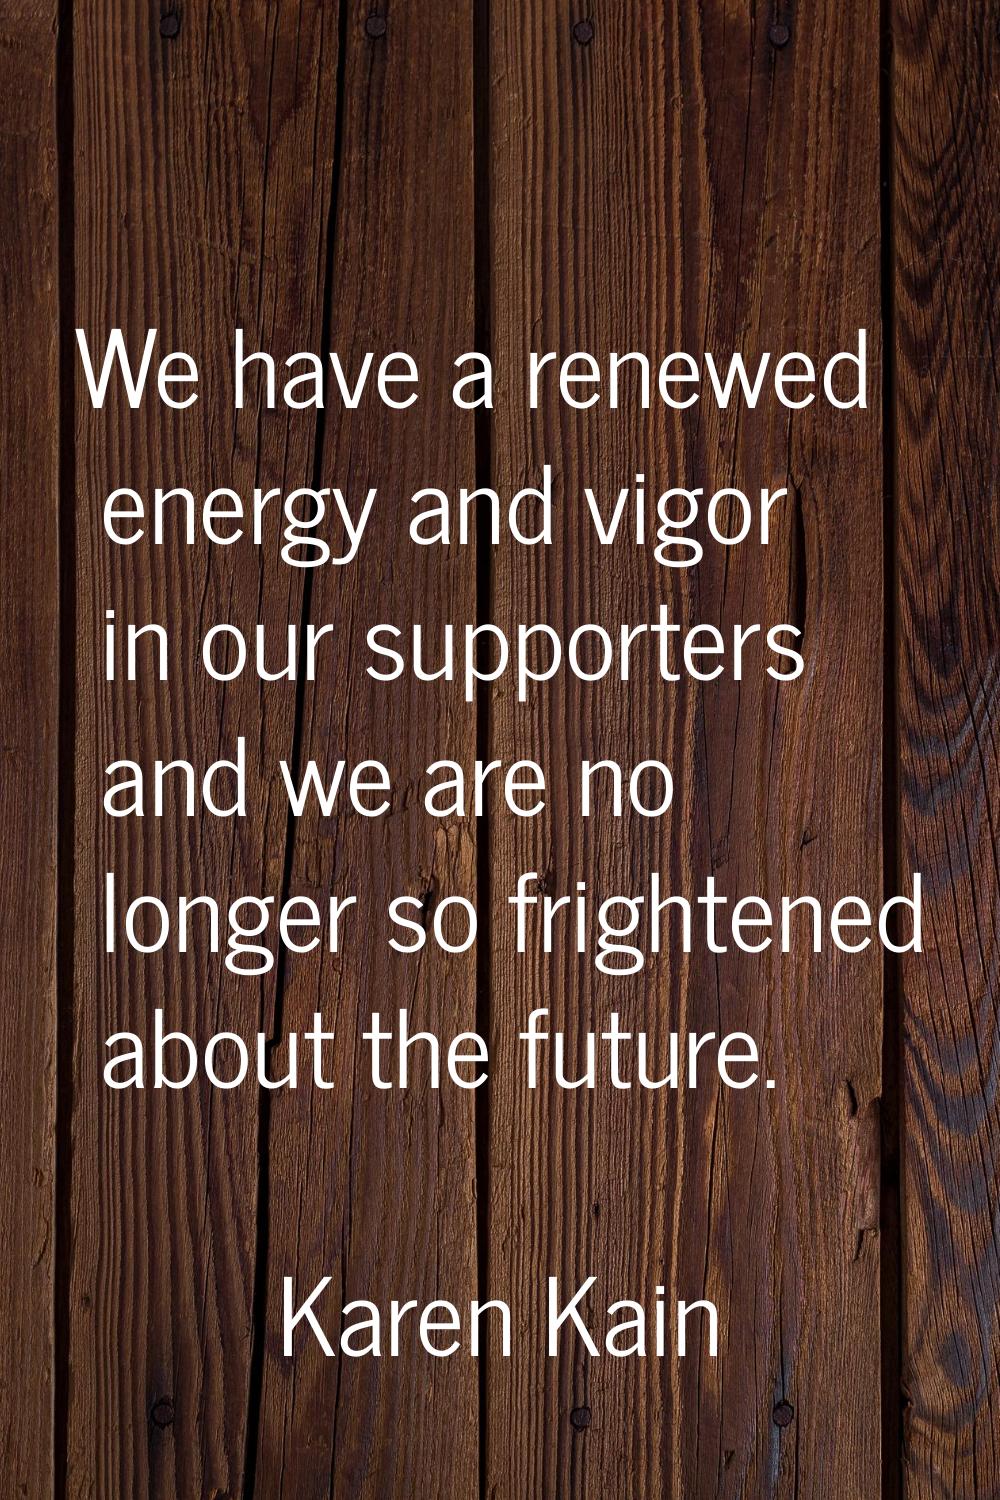 We have a renewed energy and vigor in our supporters and we are no longer so frightened about the f